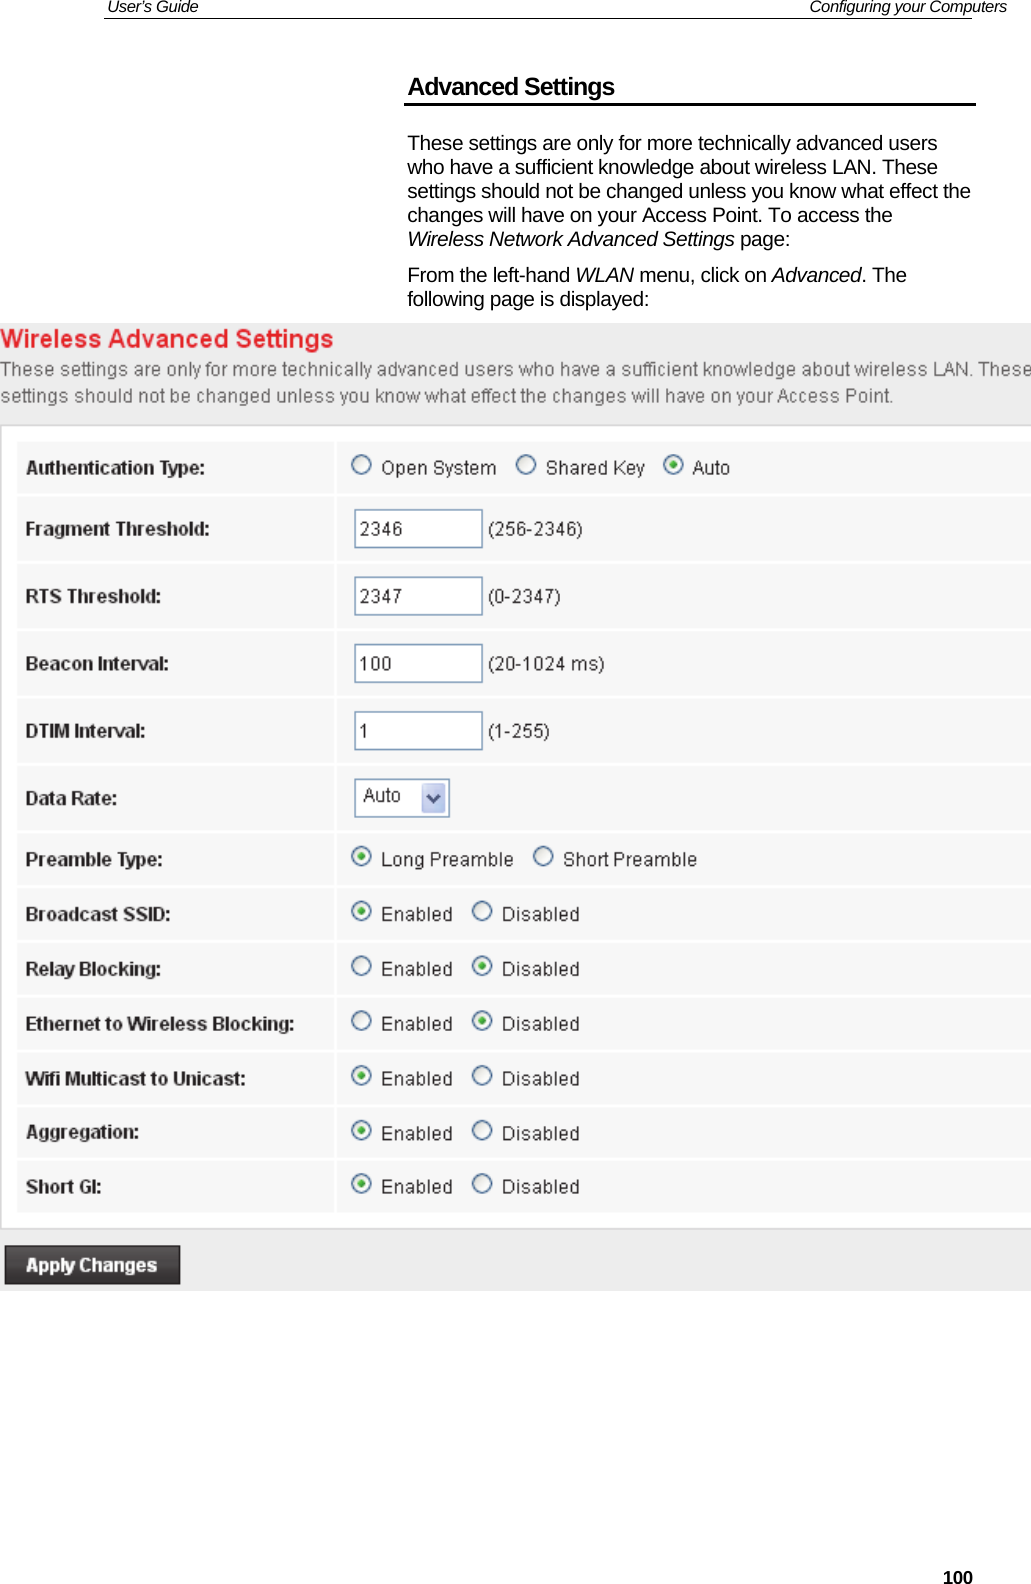 User’s Guide   Configuring your Computers  100Advanced Settings These settings are only for more technically advanced users who have a sufficient knowledge about wireless LAN. These settings should not be changed unless you know what effect the changes will have on your Access Point. To access the Wireless Network Advanced Settings page: From the left-hand WLAN menu, click on Advanced. The following page is displayed:        